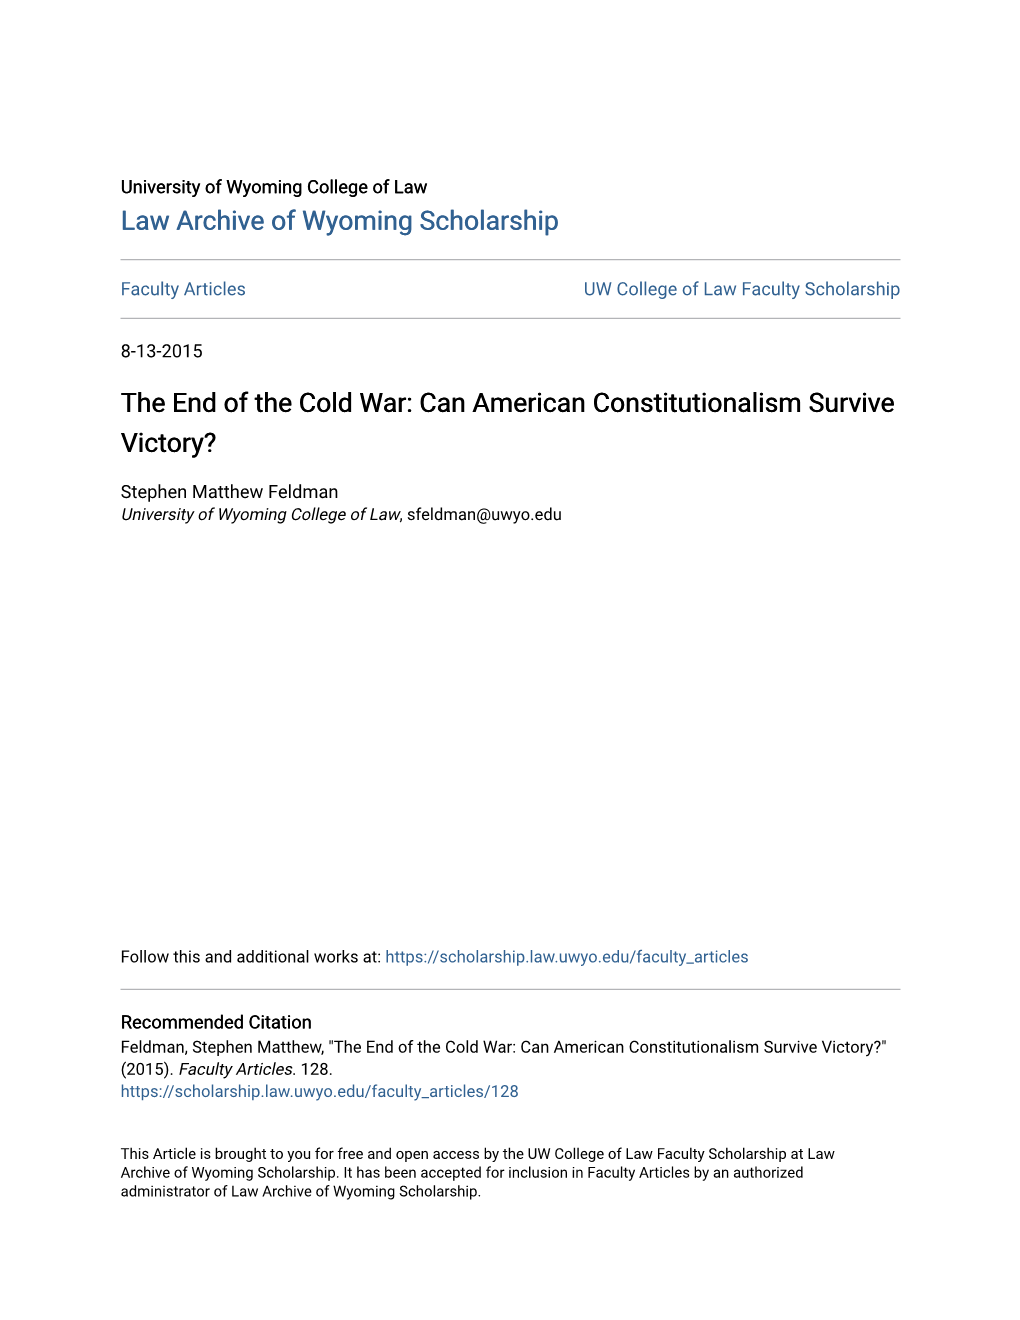 The End of the Cold War: Can American Constitutionalism Survive Victory?